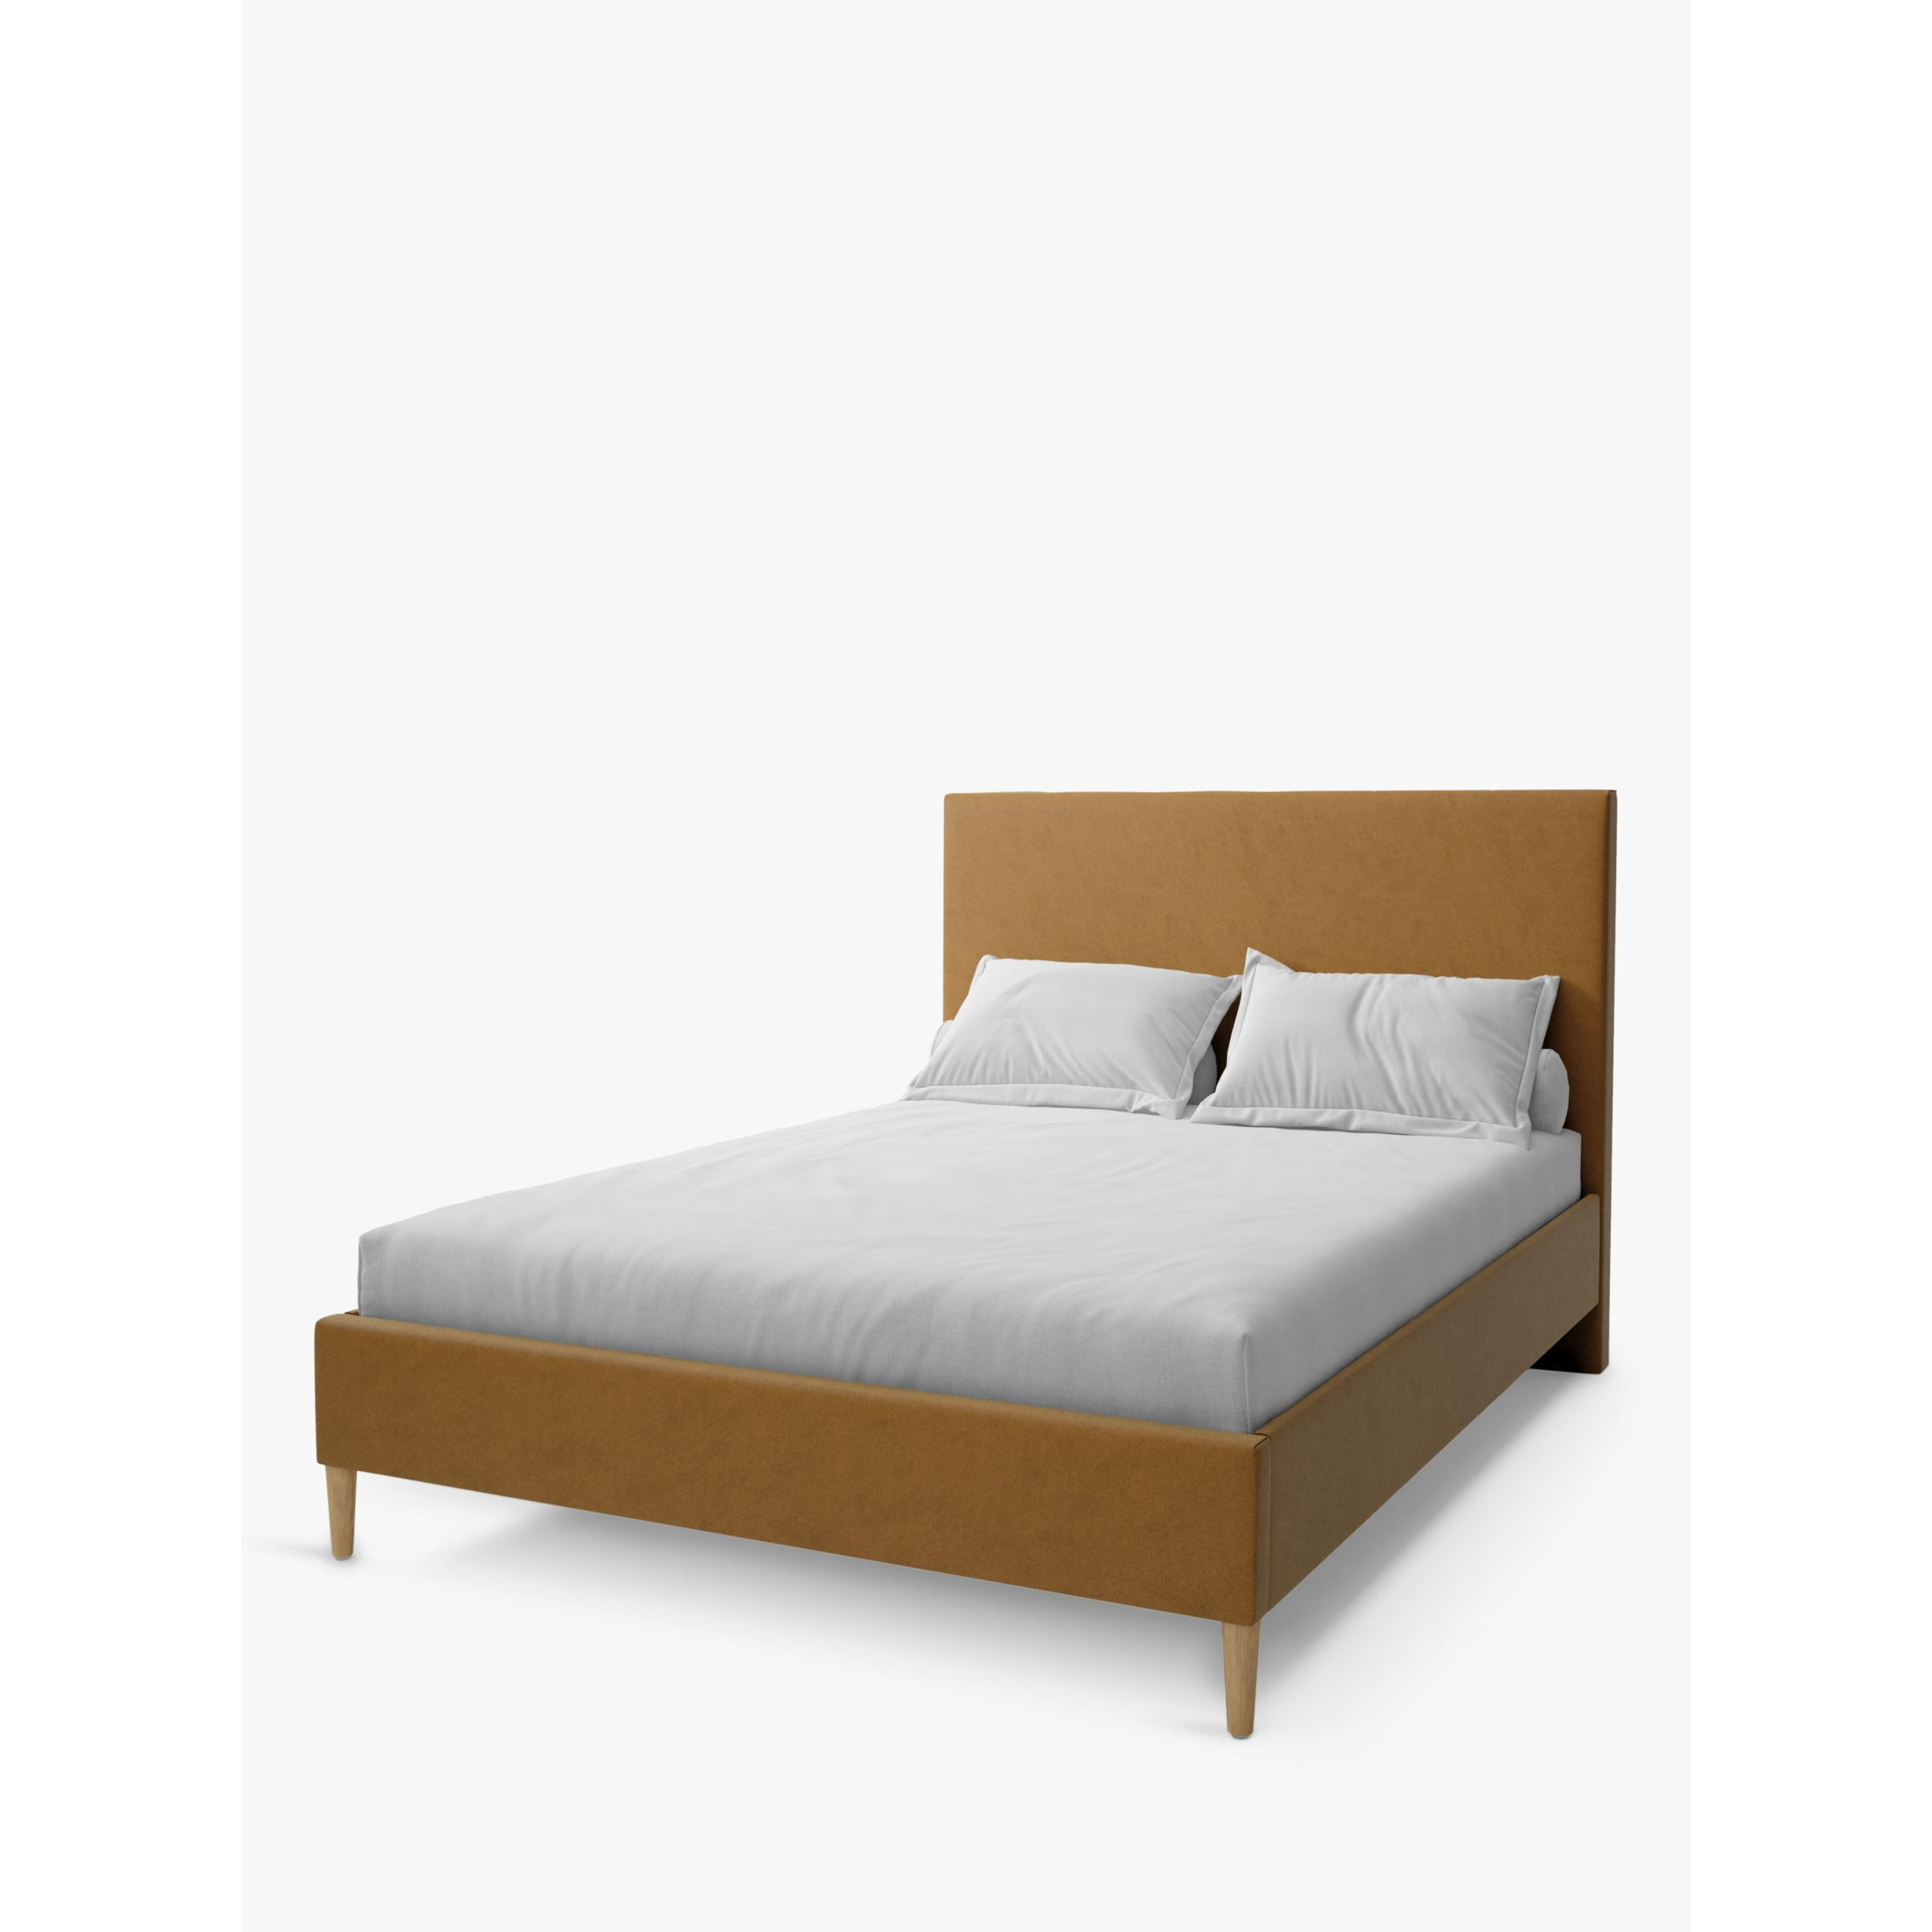 Koti Home Dee Upholstered Bed Frame, Double - image 1